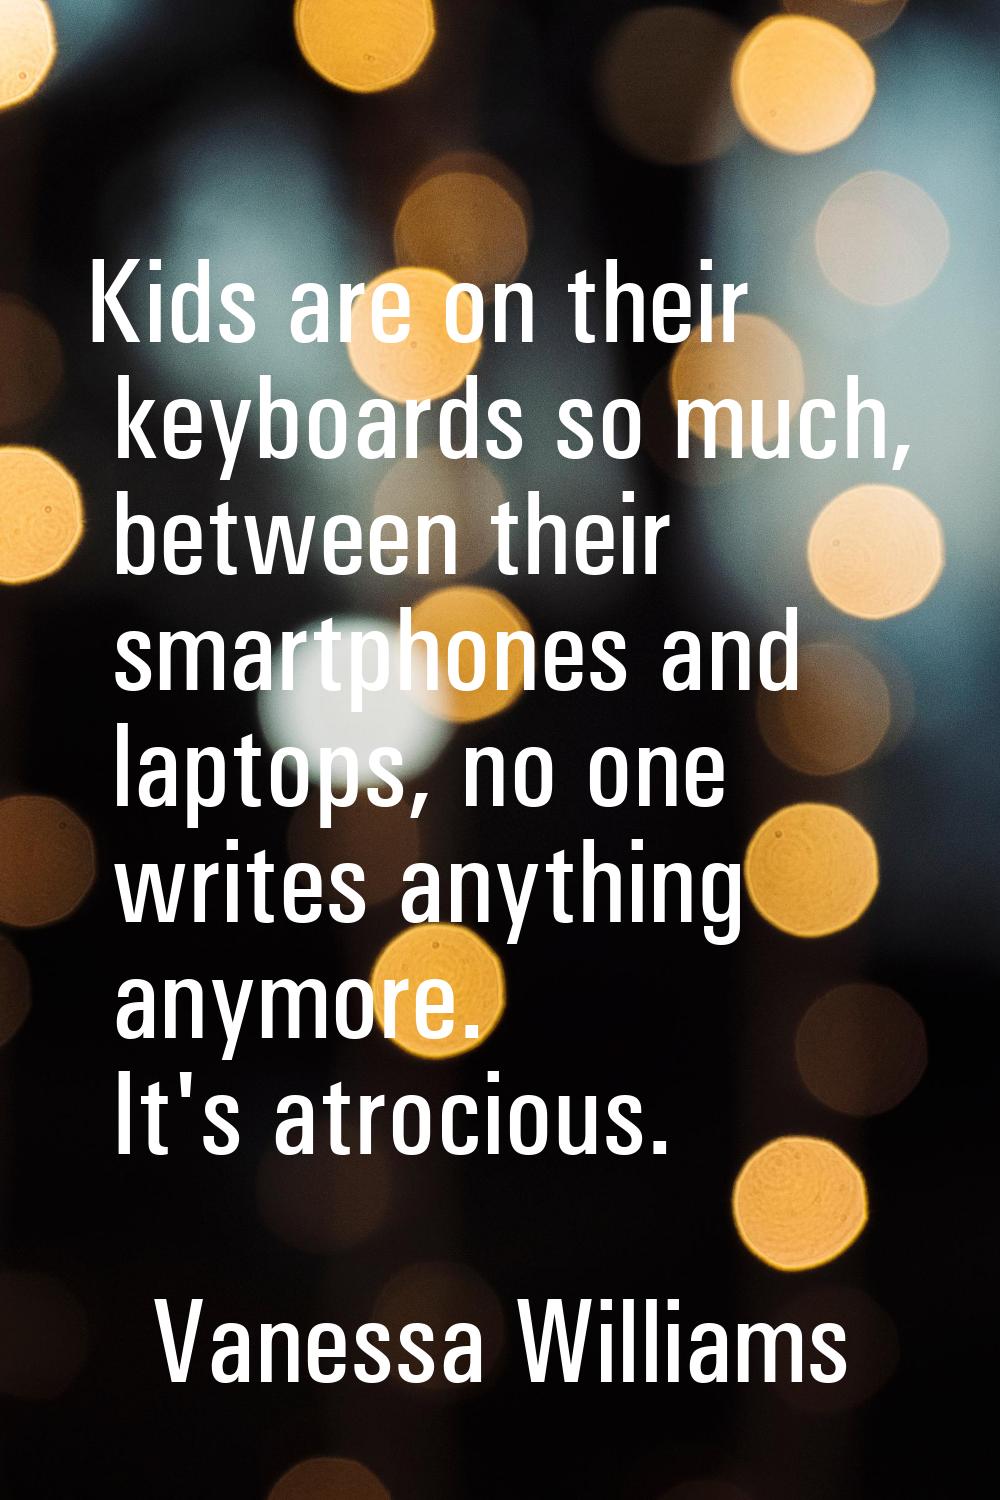 Kids are on their keyboards so much, between their smartphones and laptops, no one writes anything 